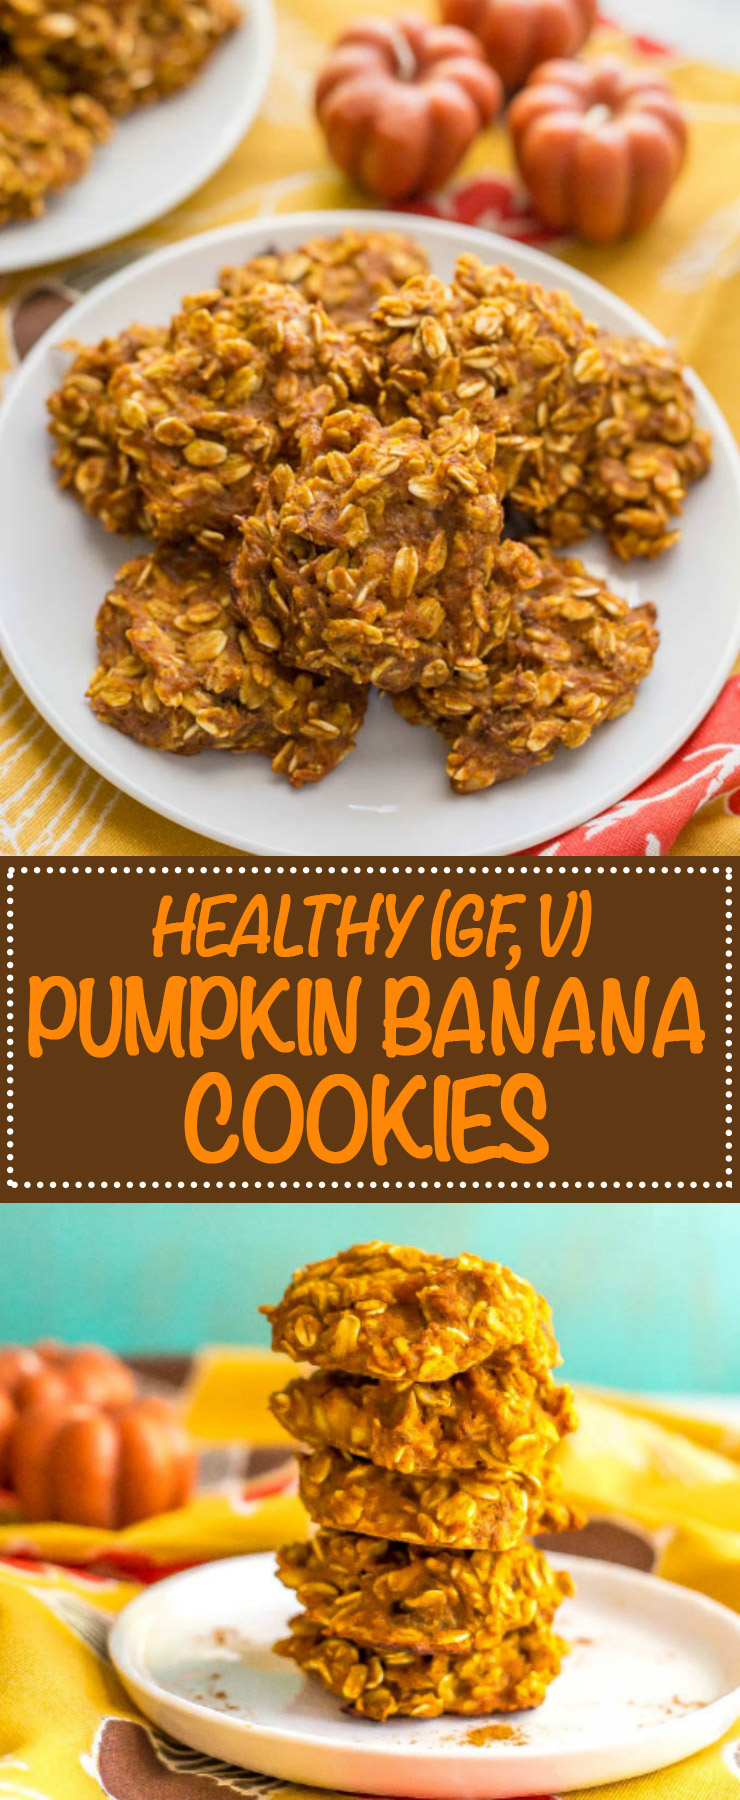 Pumpkin banana oatmeal cookies are a soft, naturally sweetened cookie with warm pumpkin flavor! These yummy cookies are gluten-free, dairy-free and vegan and healthy enough to enjoy as a breakfast cookie! | www.familyfoodonthetable.com